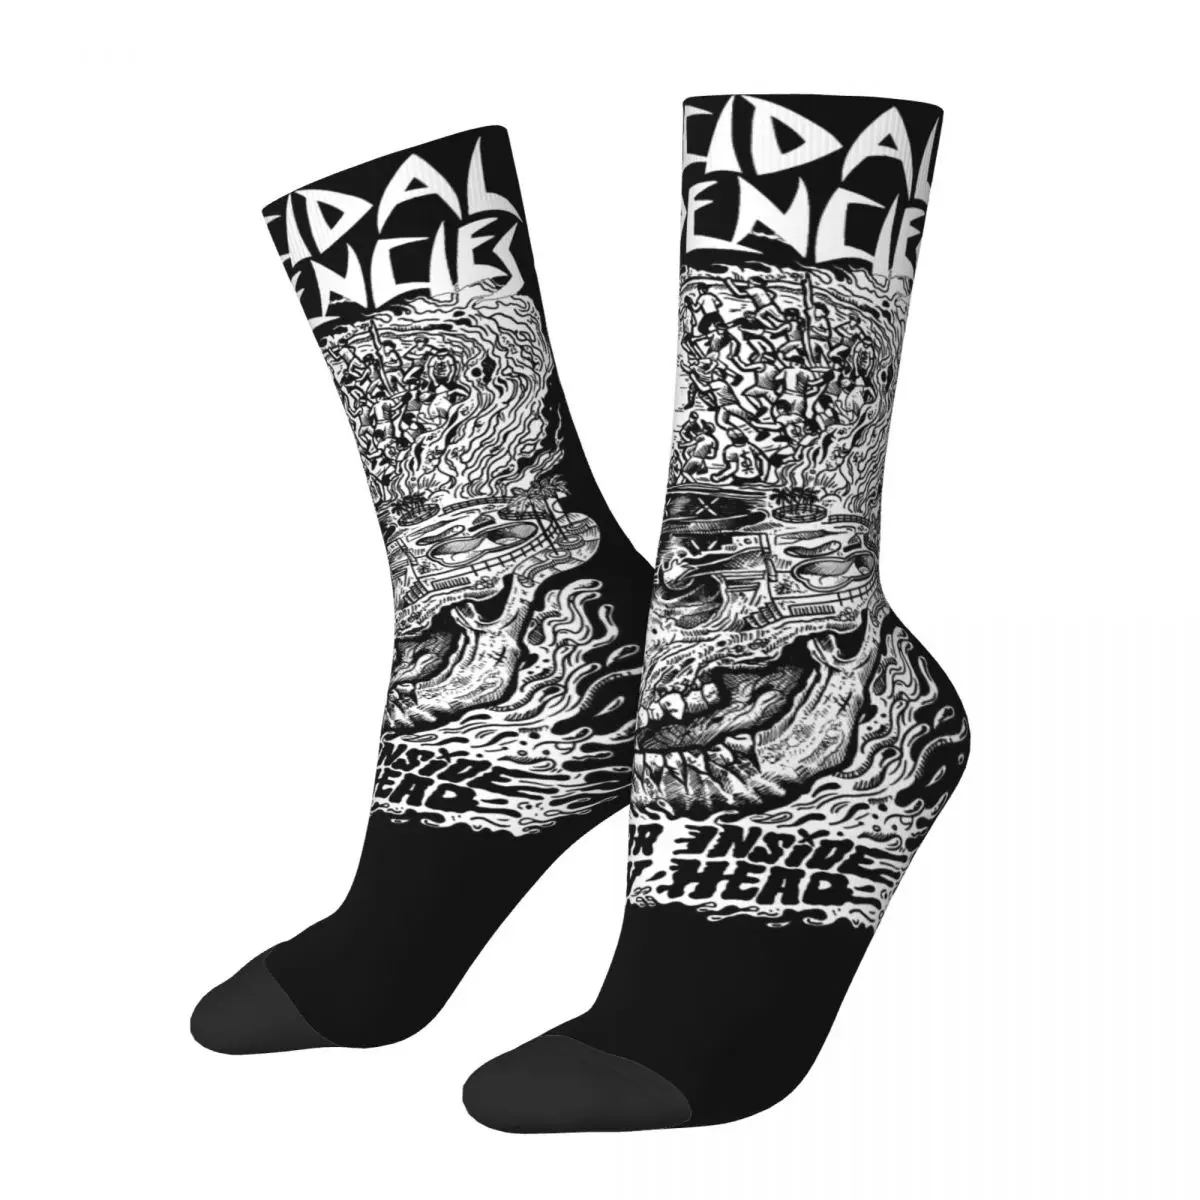 Suicidal Tendencies Men Women Socks Windproof Applicable throughout the year Dressing Gifts